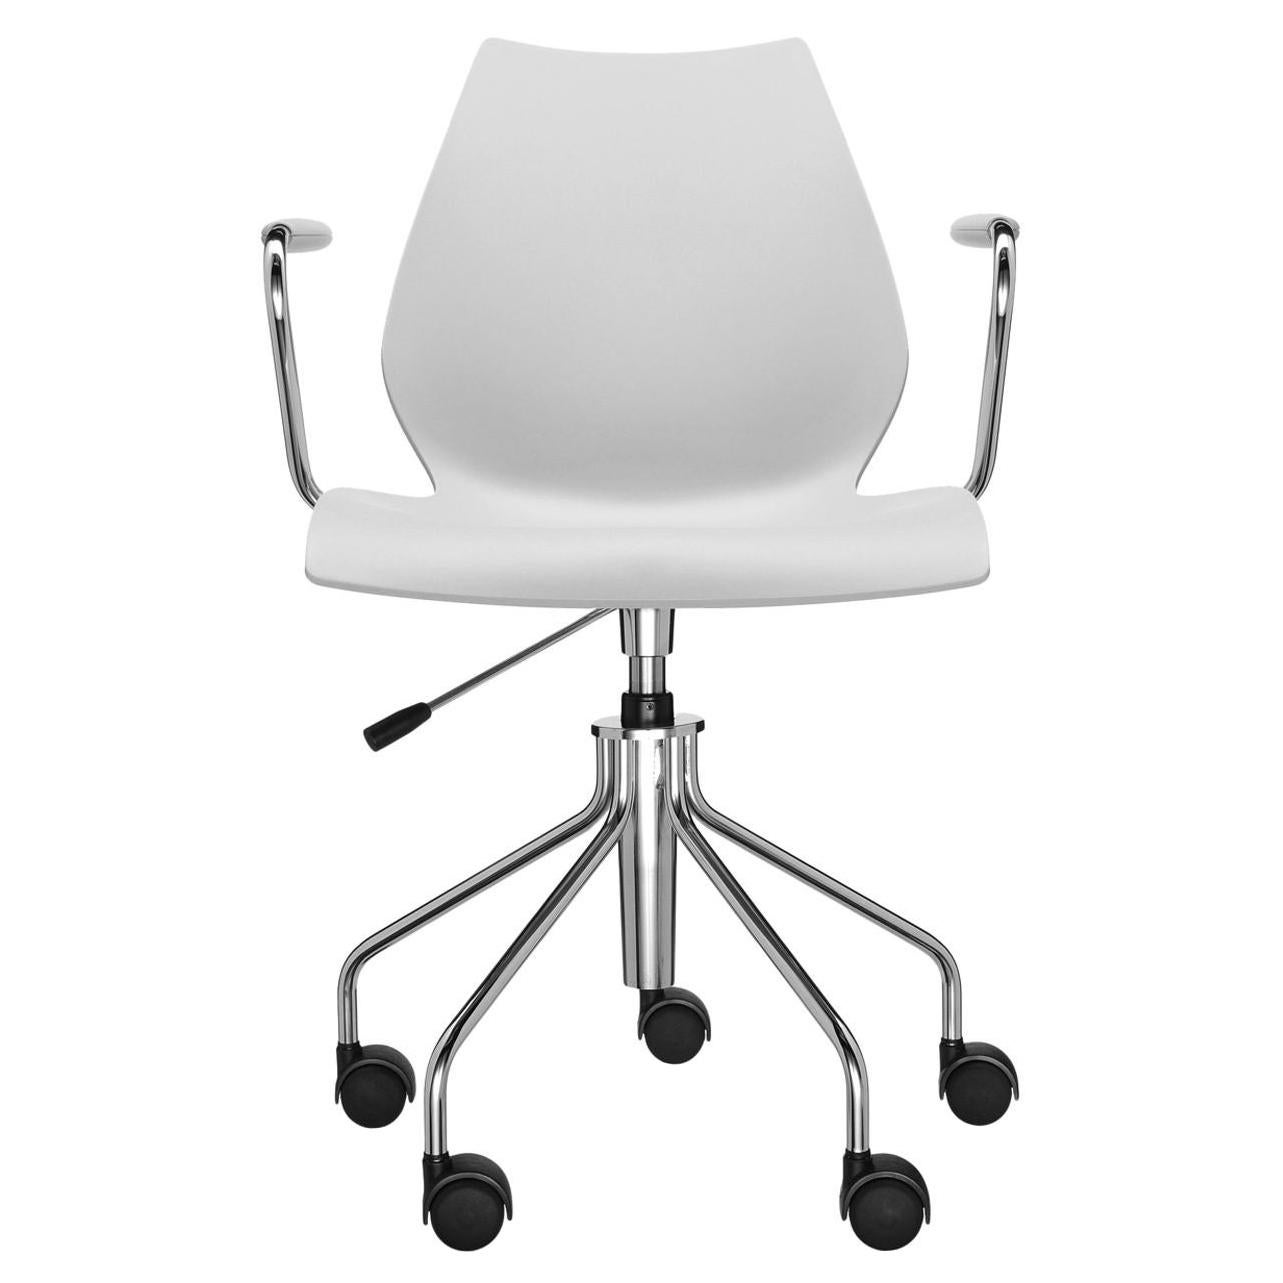 Kartell Maui Swivel Chair Adjustable in Pale Grey by Vico Magistretti